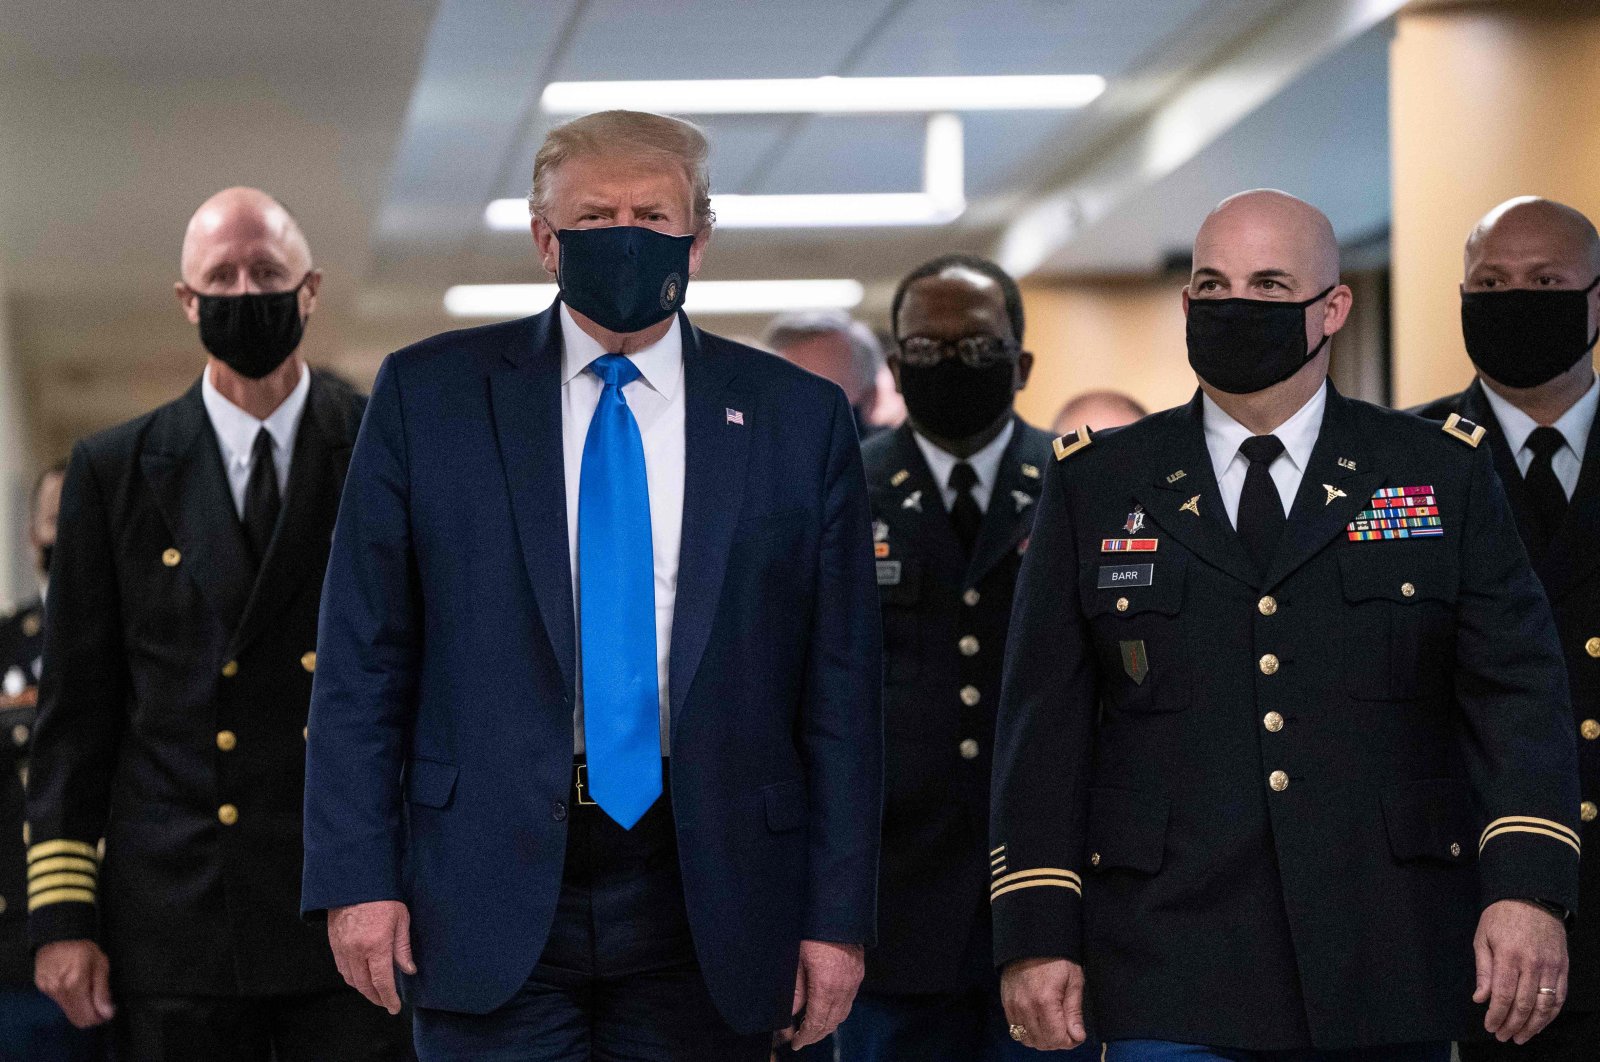 U.S. President Donald Trump wears a mask as he visits Walter Reed National Military Medical Center in Bethesda, Maryland, U.S., July 11, 2020. (AFP Photo)